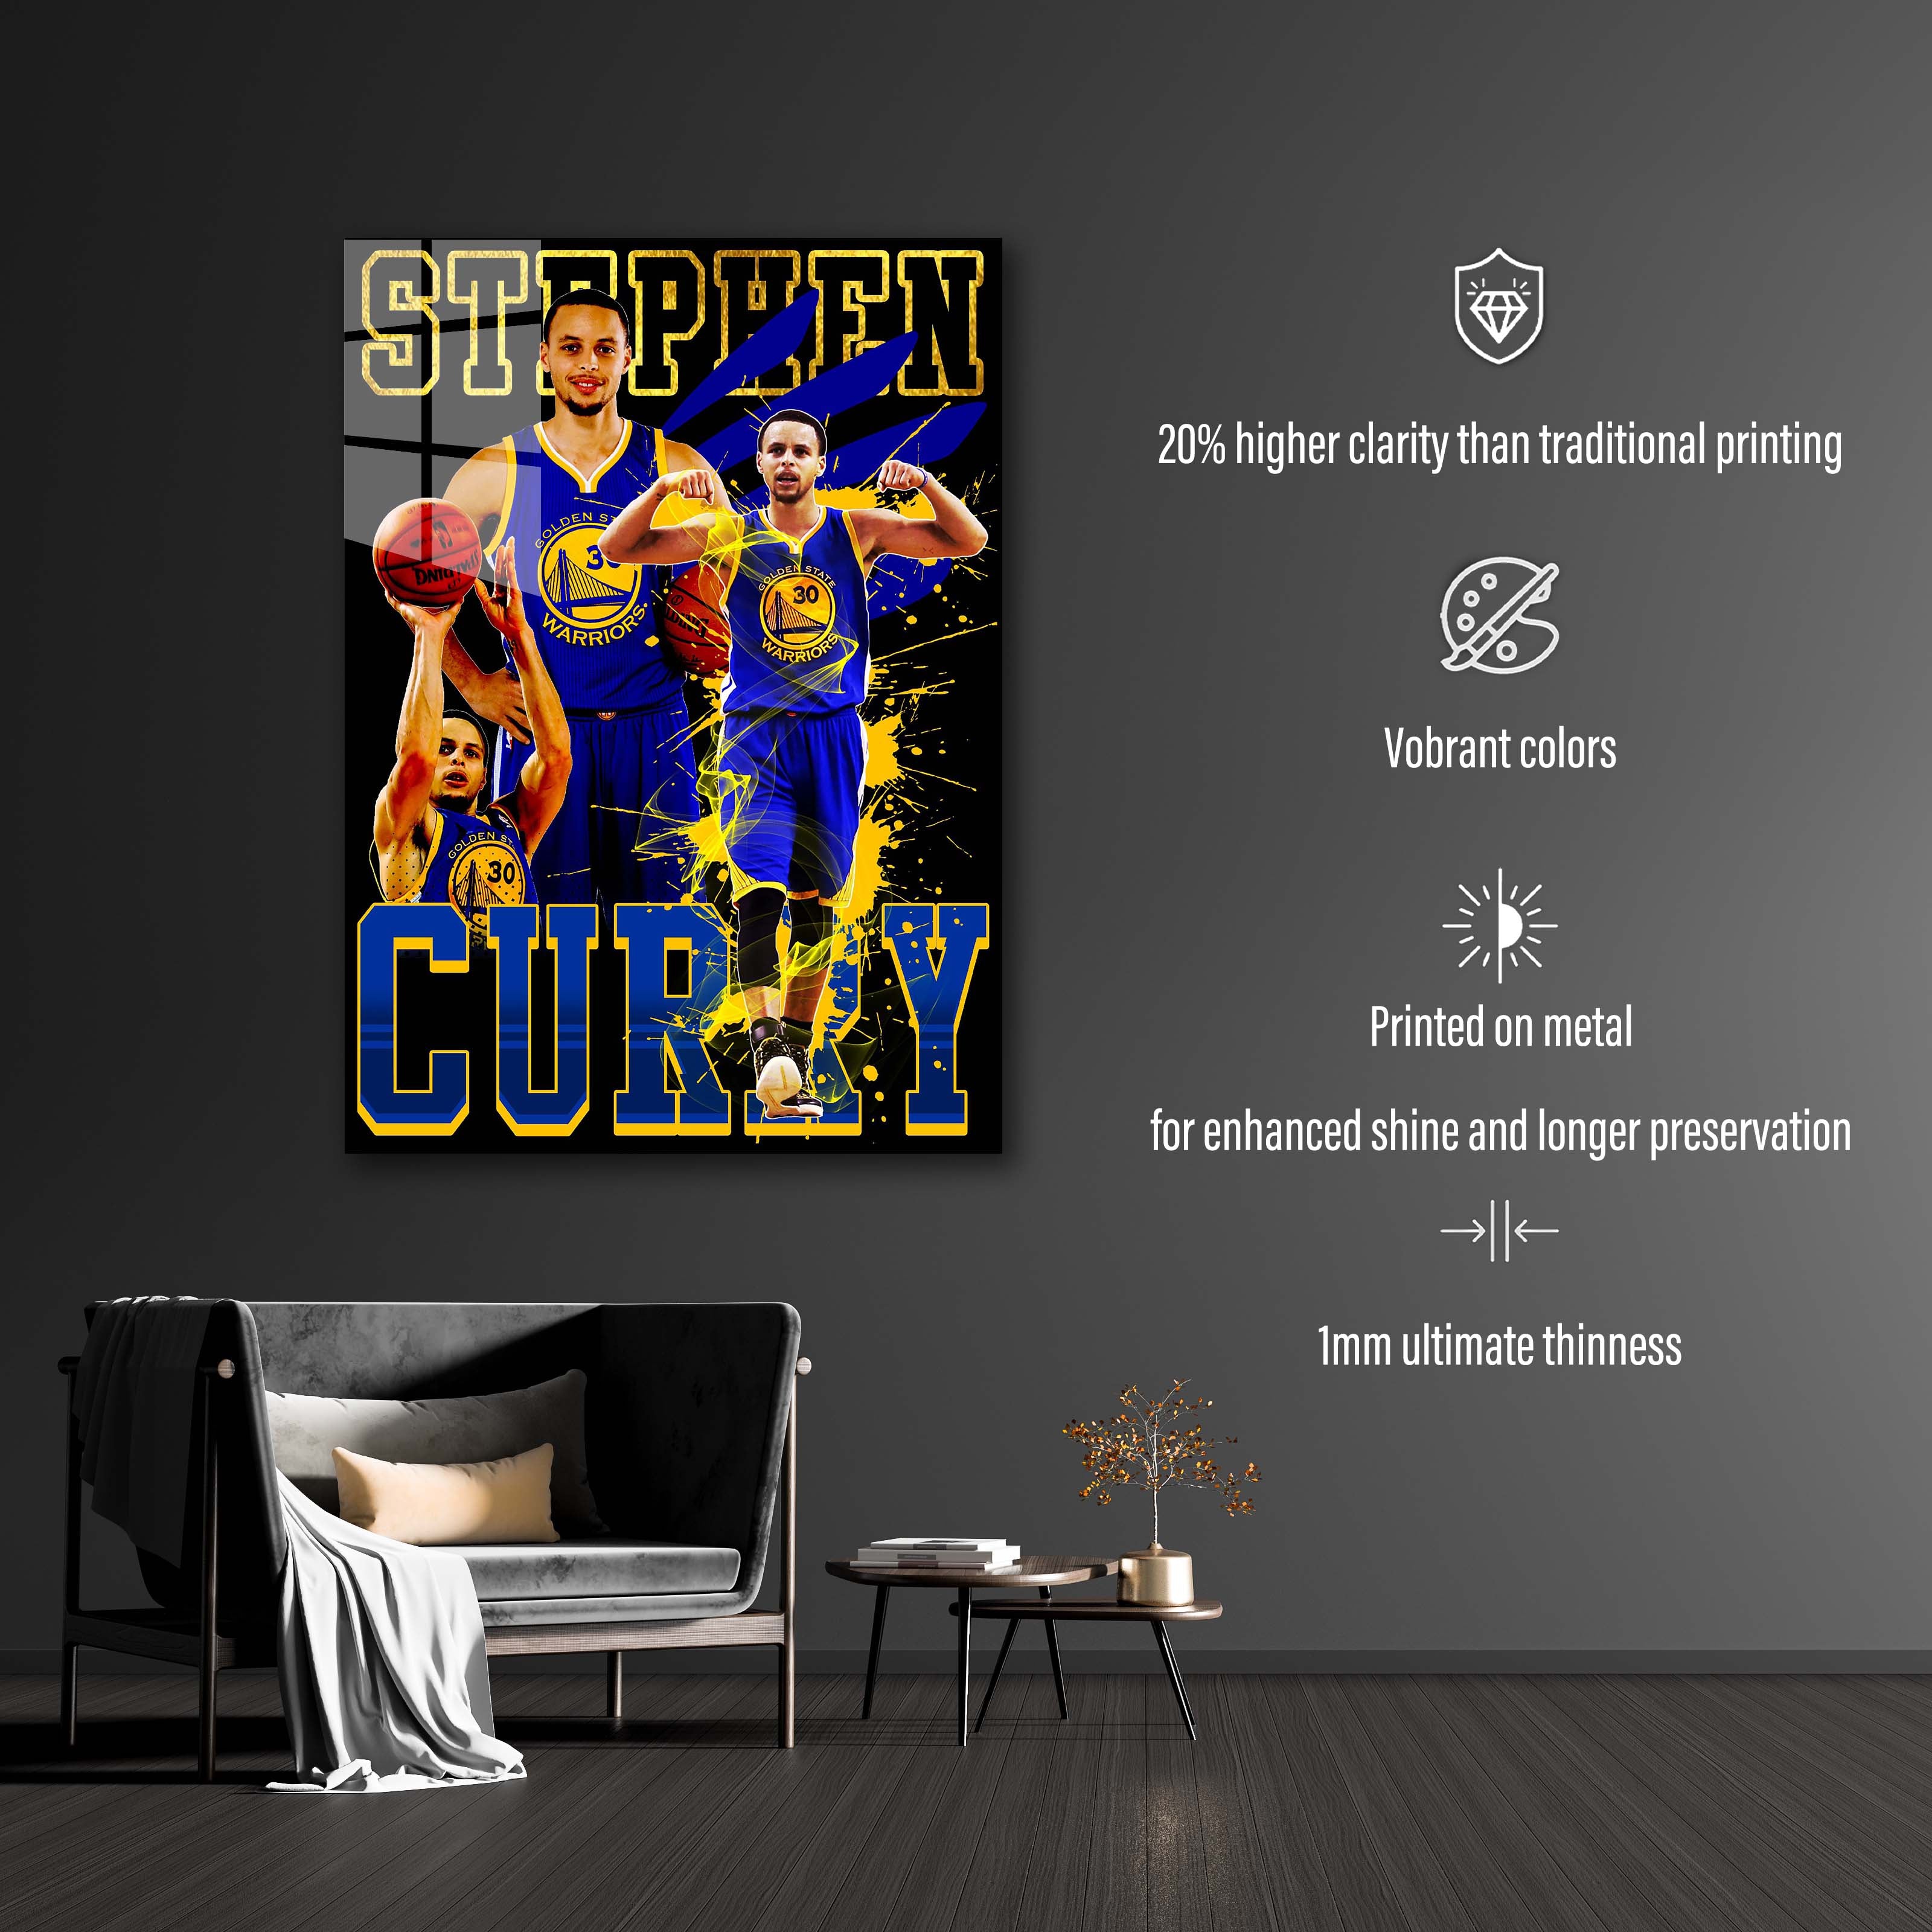 Stephen Curry v2-designed by @My Kido Art